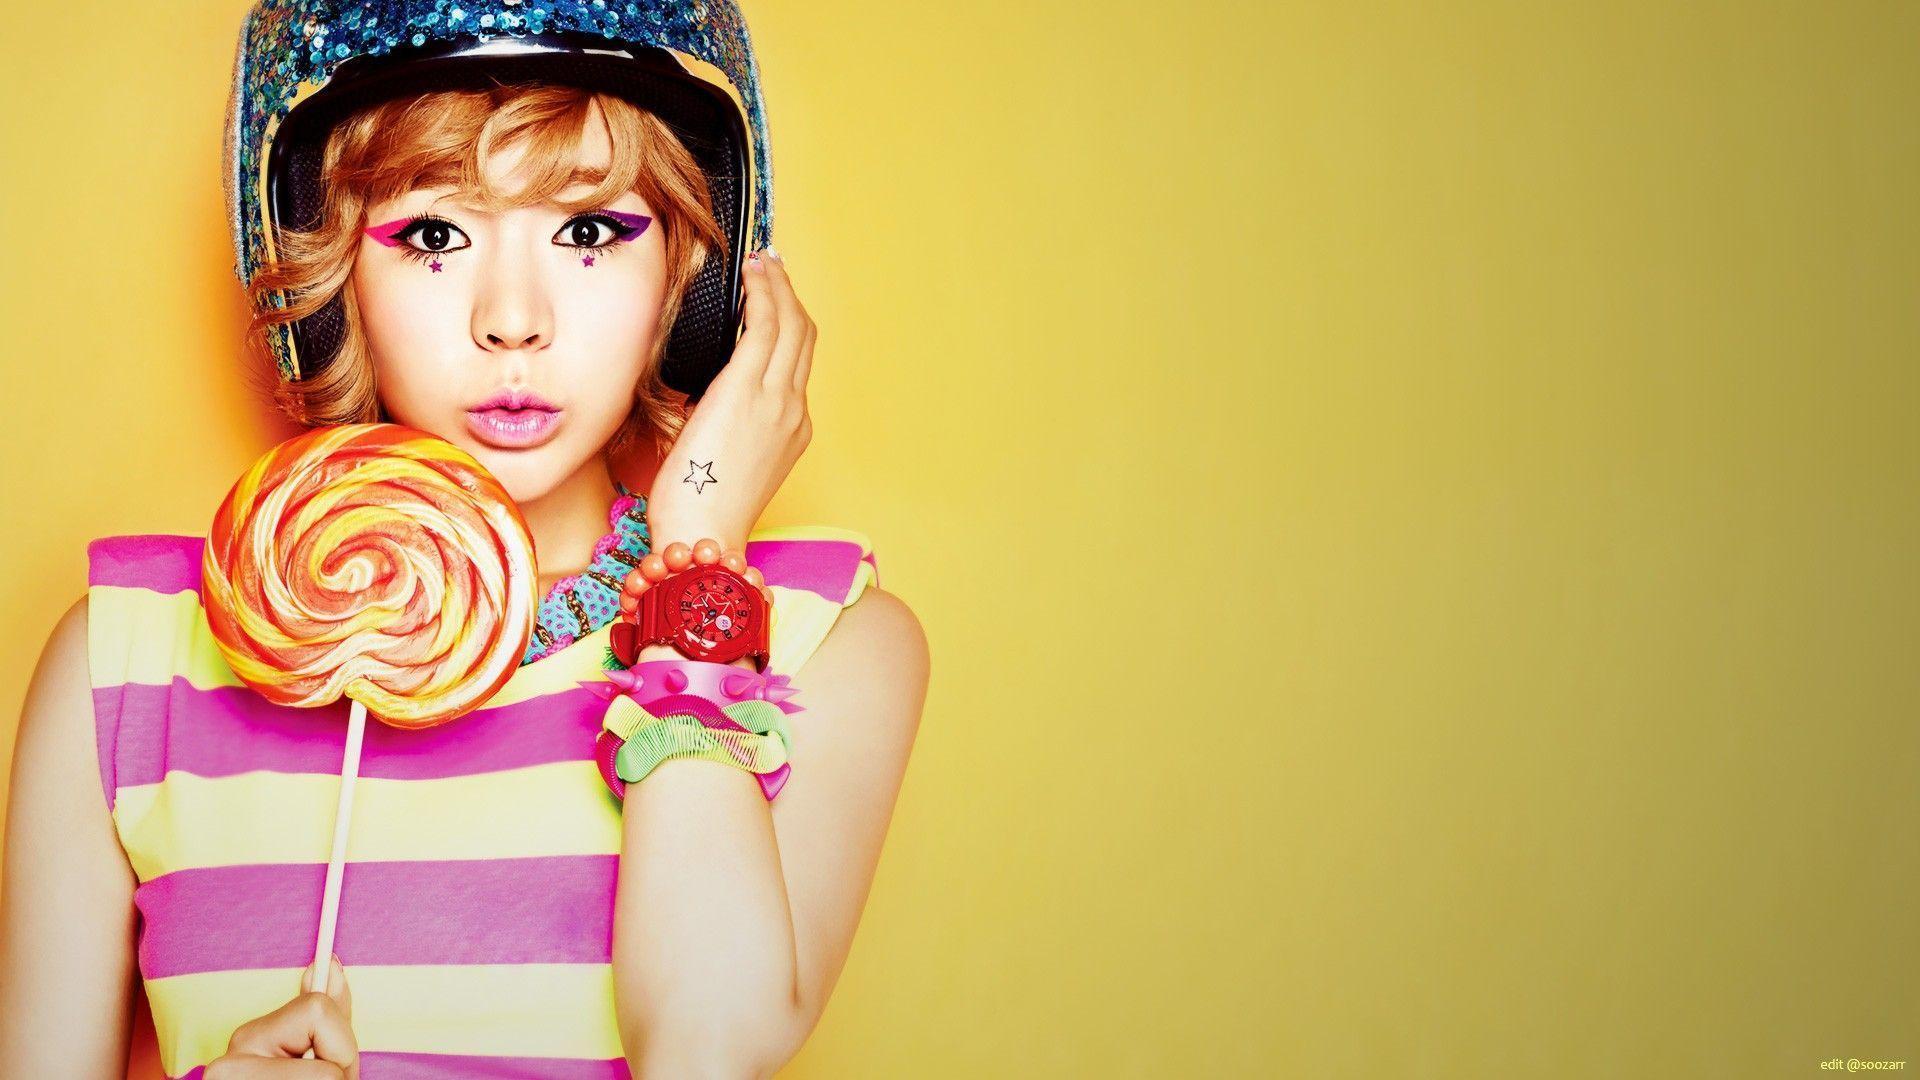 Snsd Sunny 2013 Background. High Quality Wallpaper, Wallpaper